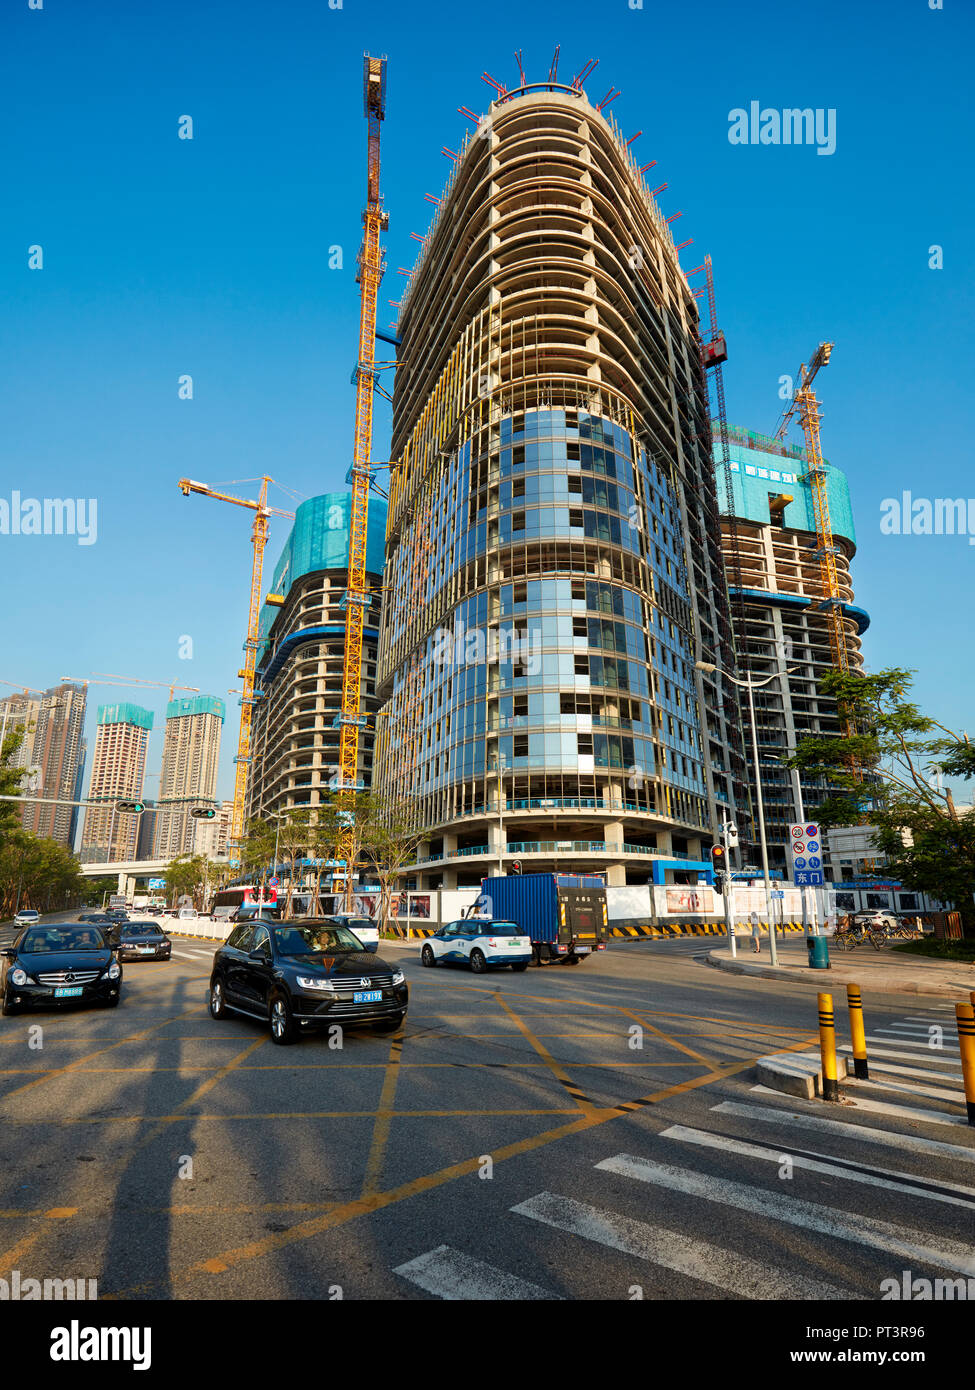 Construction of new high-rise building in Shenzhen city. Guangdong Province, China. Stock Photo